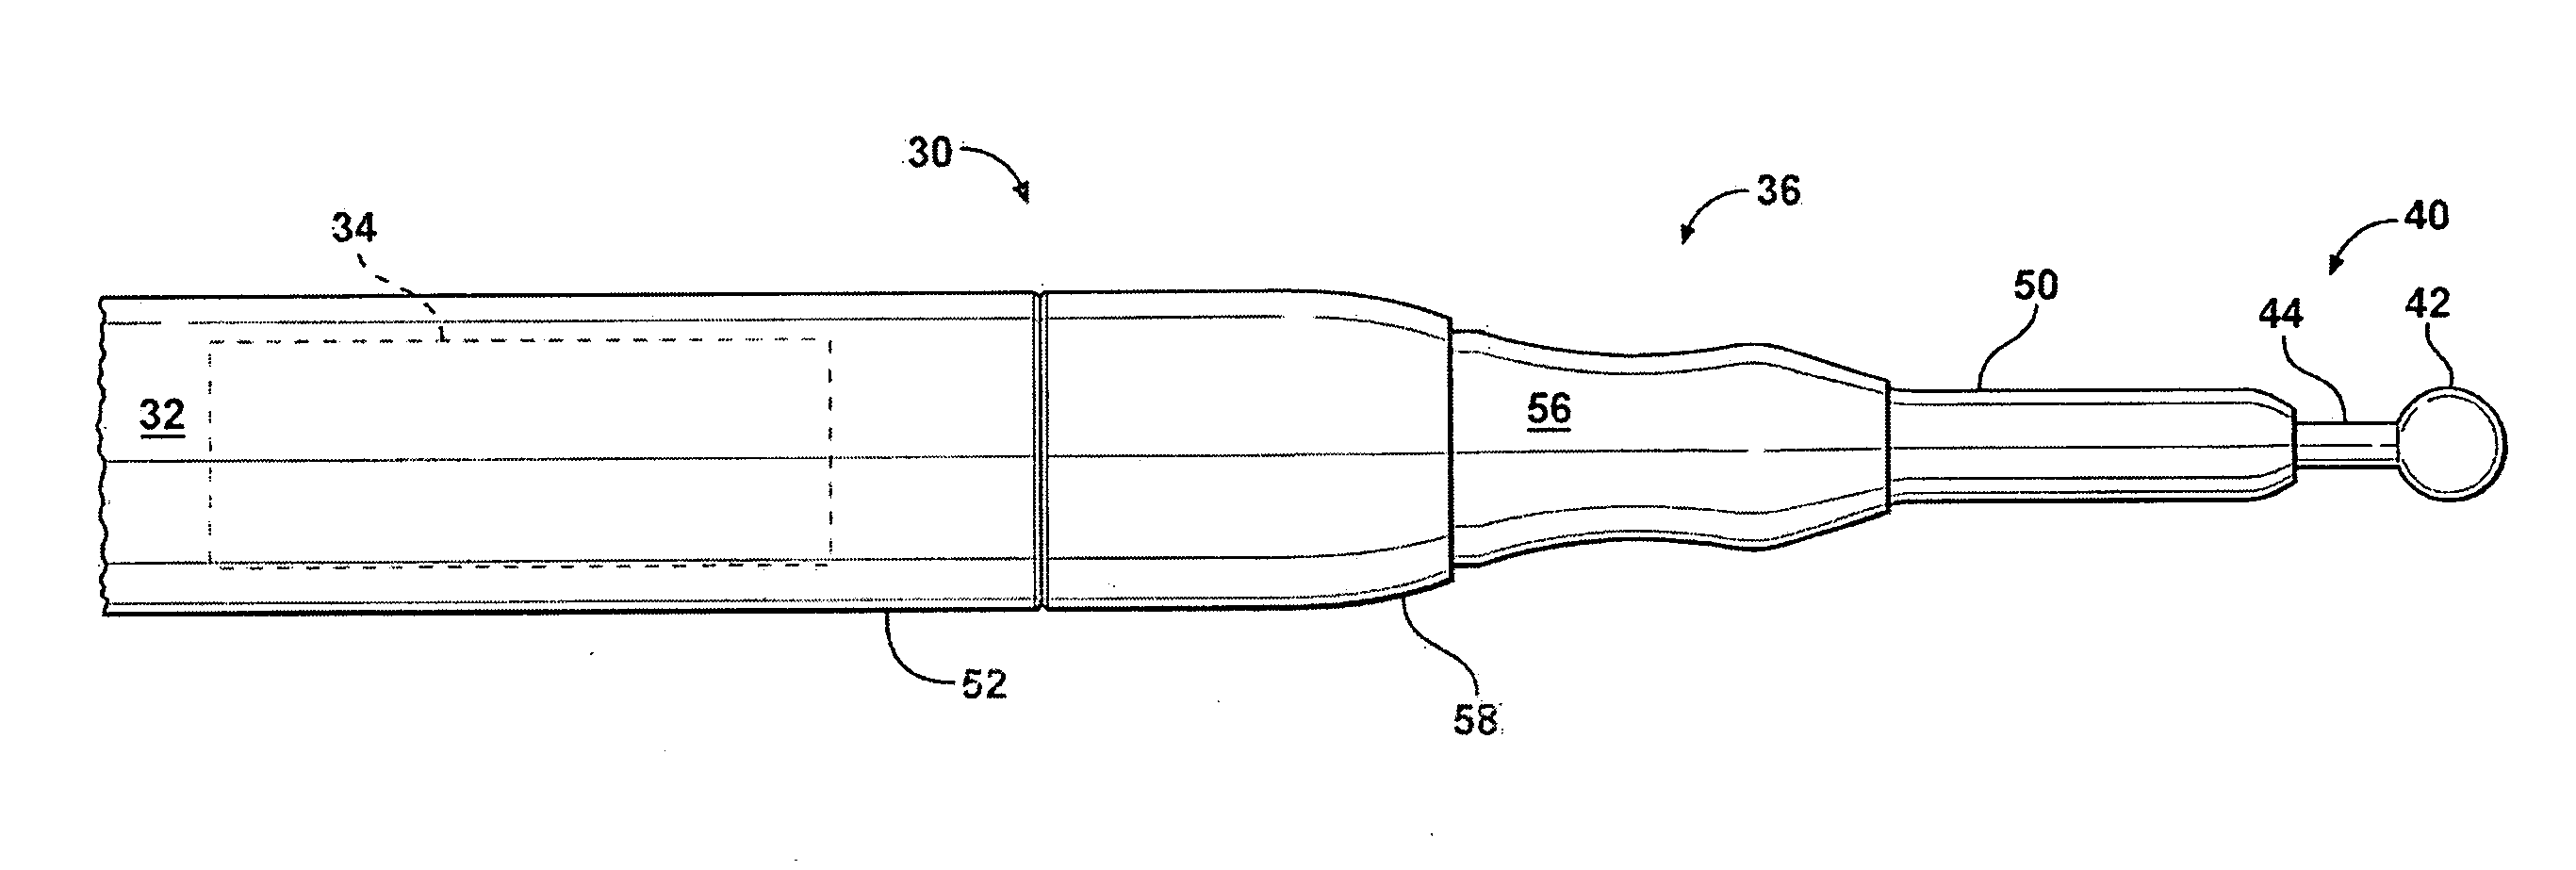 Medical/surgical powered handpiece for rotating the shaft of a accessory, the handpiece having a coupling assembly that facilitates the fine or coarse adjustment of the extension of the accessory shaft